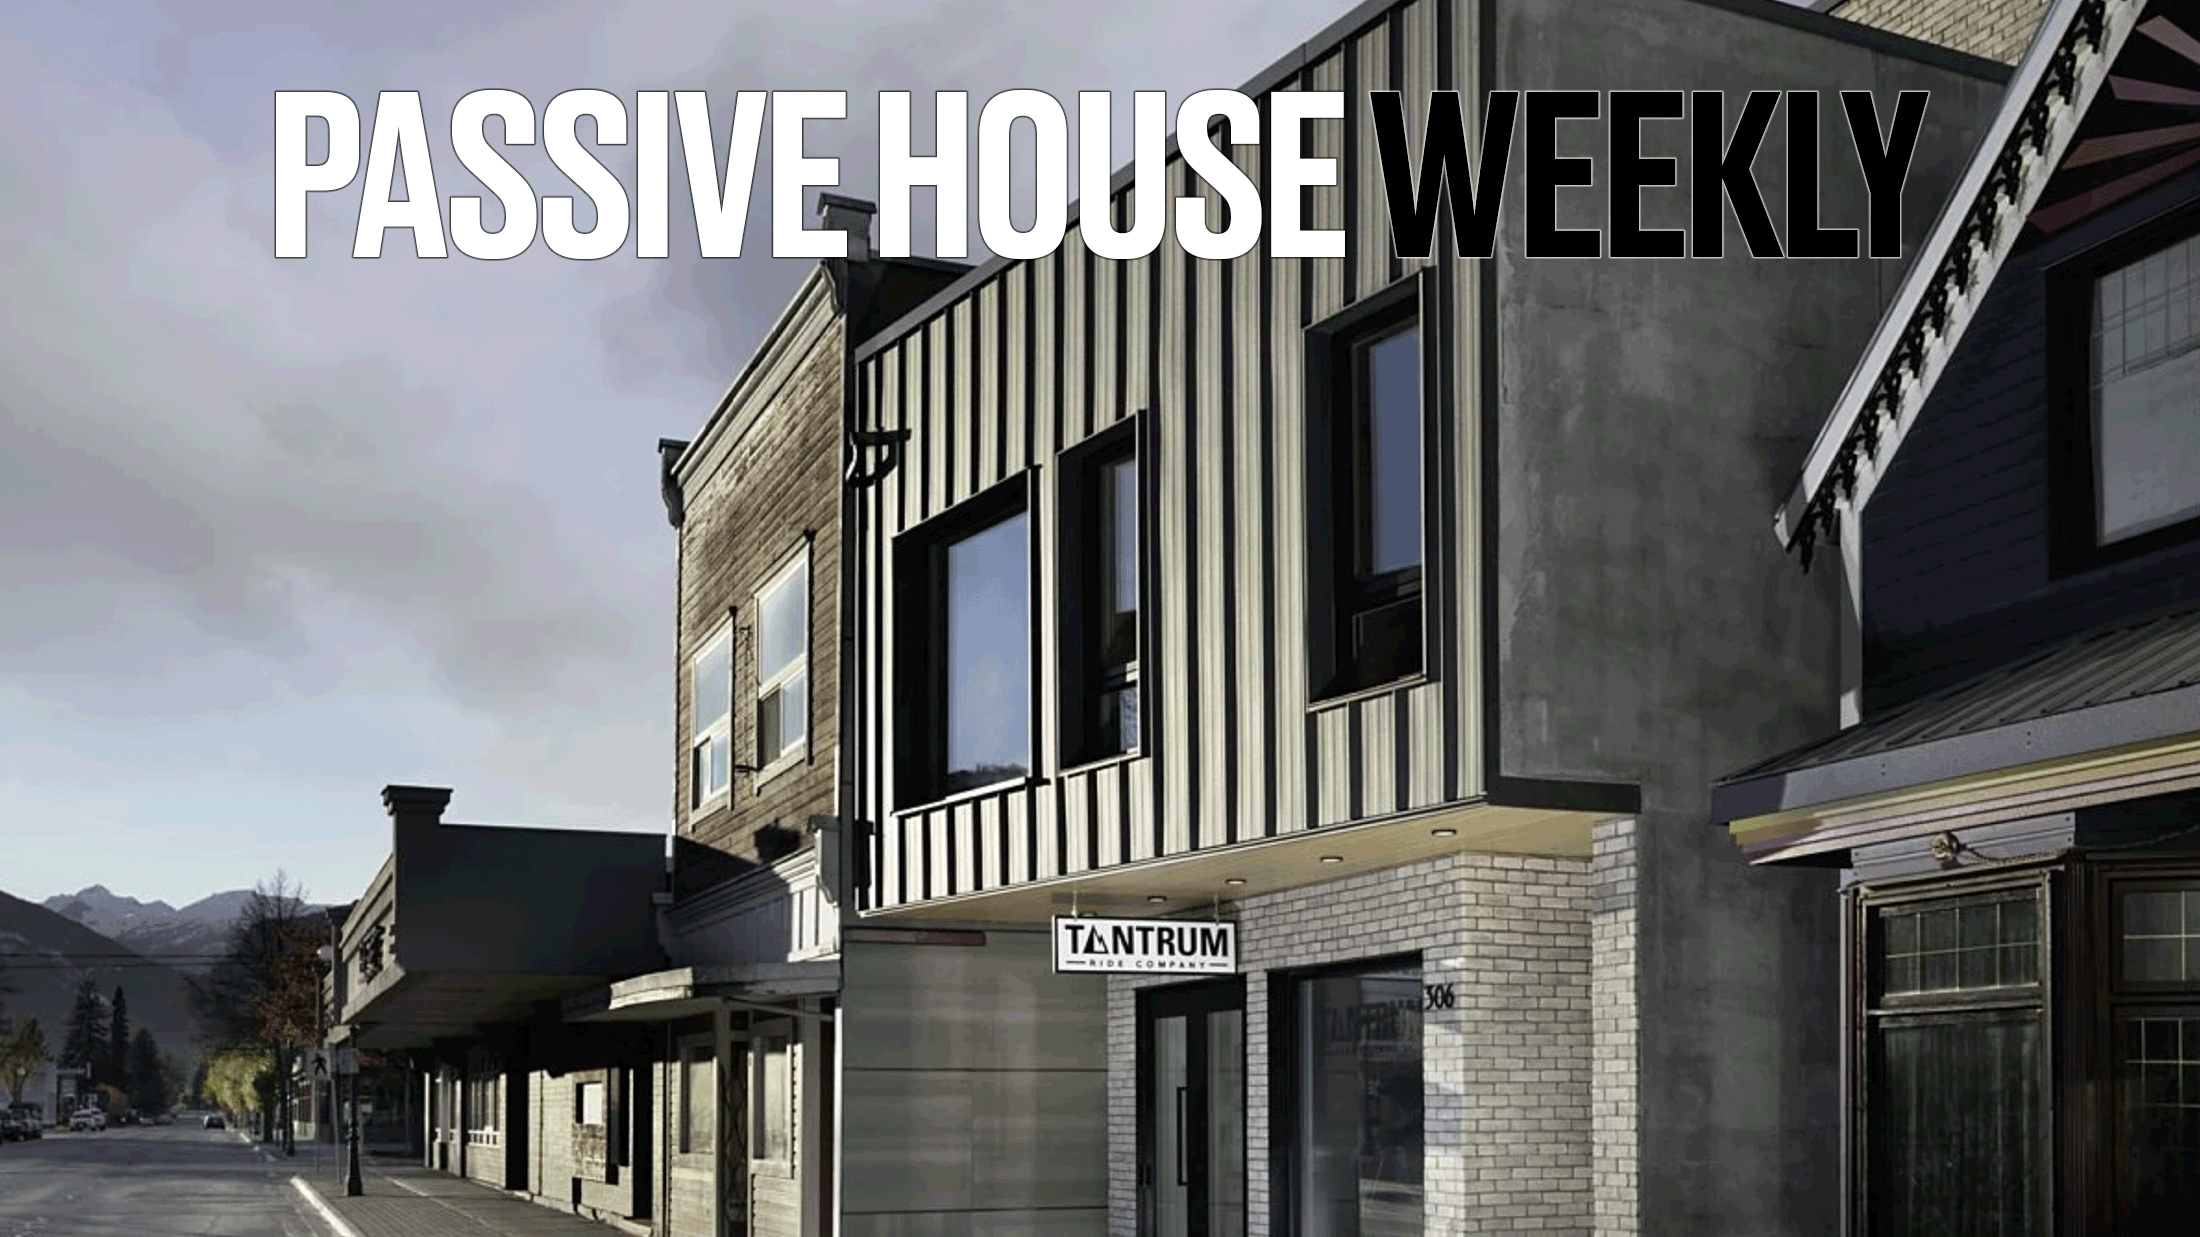 Passive House Weekly: March 28, 2022